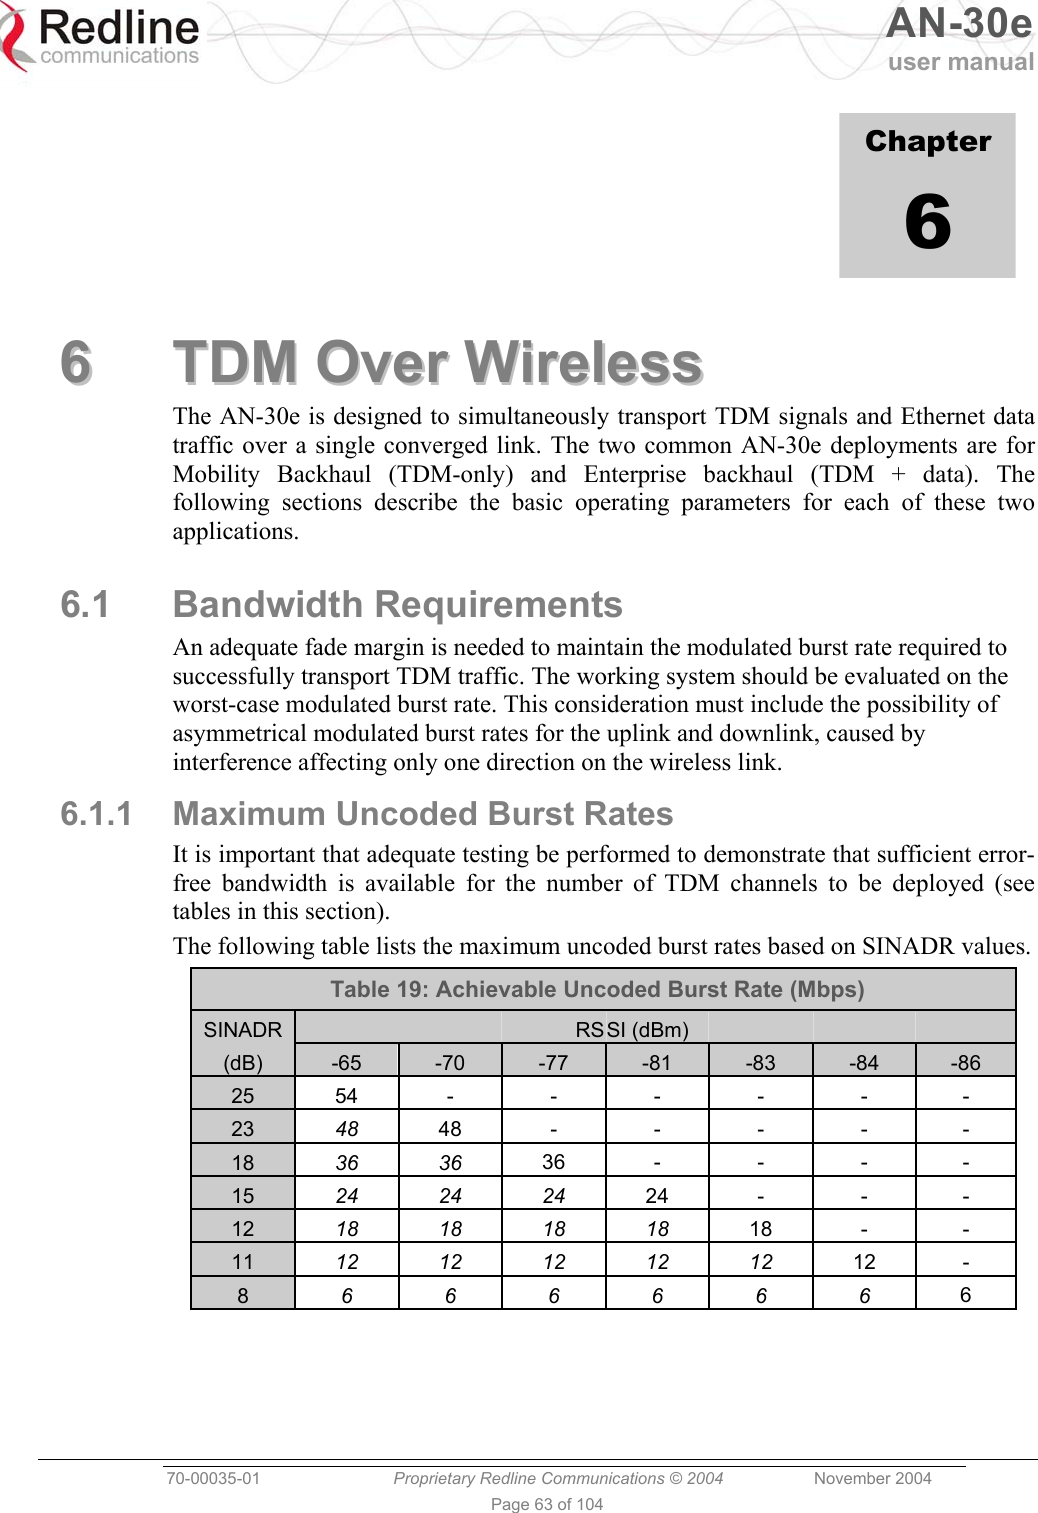   AN-30e user manual  70-00035-01  Proprietary Redline Communications © 2004 November 2004   Page 63 of 104             Chapter 6 66  TTDDMM  OOvveerr  WWiirreelleessss  The AN-30e is designed to simultaneously transport TDM signals and Ethernet data traffic over a single converged link. The two common AN-30e deployments are for Mobility Backhaul (TDM-only) and Enterprise backhaul (TDM + data). The following sections describe the basic operating parameters for each of these two applications.  6.1 Bandwidth Requirements An adequate fade margin is needed to maintain the modulated burst rate required to successfully transport TDM traffic. The working system should be evaluated on the worst-case modulated burst rate. This consideration must include the possibility of asymmetrical modulated burst rates for the uplink and downlink, caused by interference affecting only one direction on the wireless link. 6.1.1  Maximum Uncoded Burst Rates It is important that adequate testing be performed to demonstrate that sufficient error-free bandwidth is available for the number of TDM channels to be deployed (see tables in this section). The following table lists the maximum uncoded burst rates based on SINADR values. Table 19: Achievable Uncoded Burst Rate (Mbps) SINADR      RSSI (dBm)       (dB)  -65  -70  -77  -81  -83  -84  -86 25  54 - - - - - - 23  48  48 - - - - - 18  36 36 36 -  -  -  - 15  24 24 24 24 -  -  - 12  18 18 18 18 18 -  - 11  12 12 12 12 12 12 - 8  6 6 6 6 6 6 6 